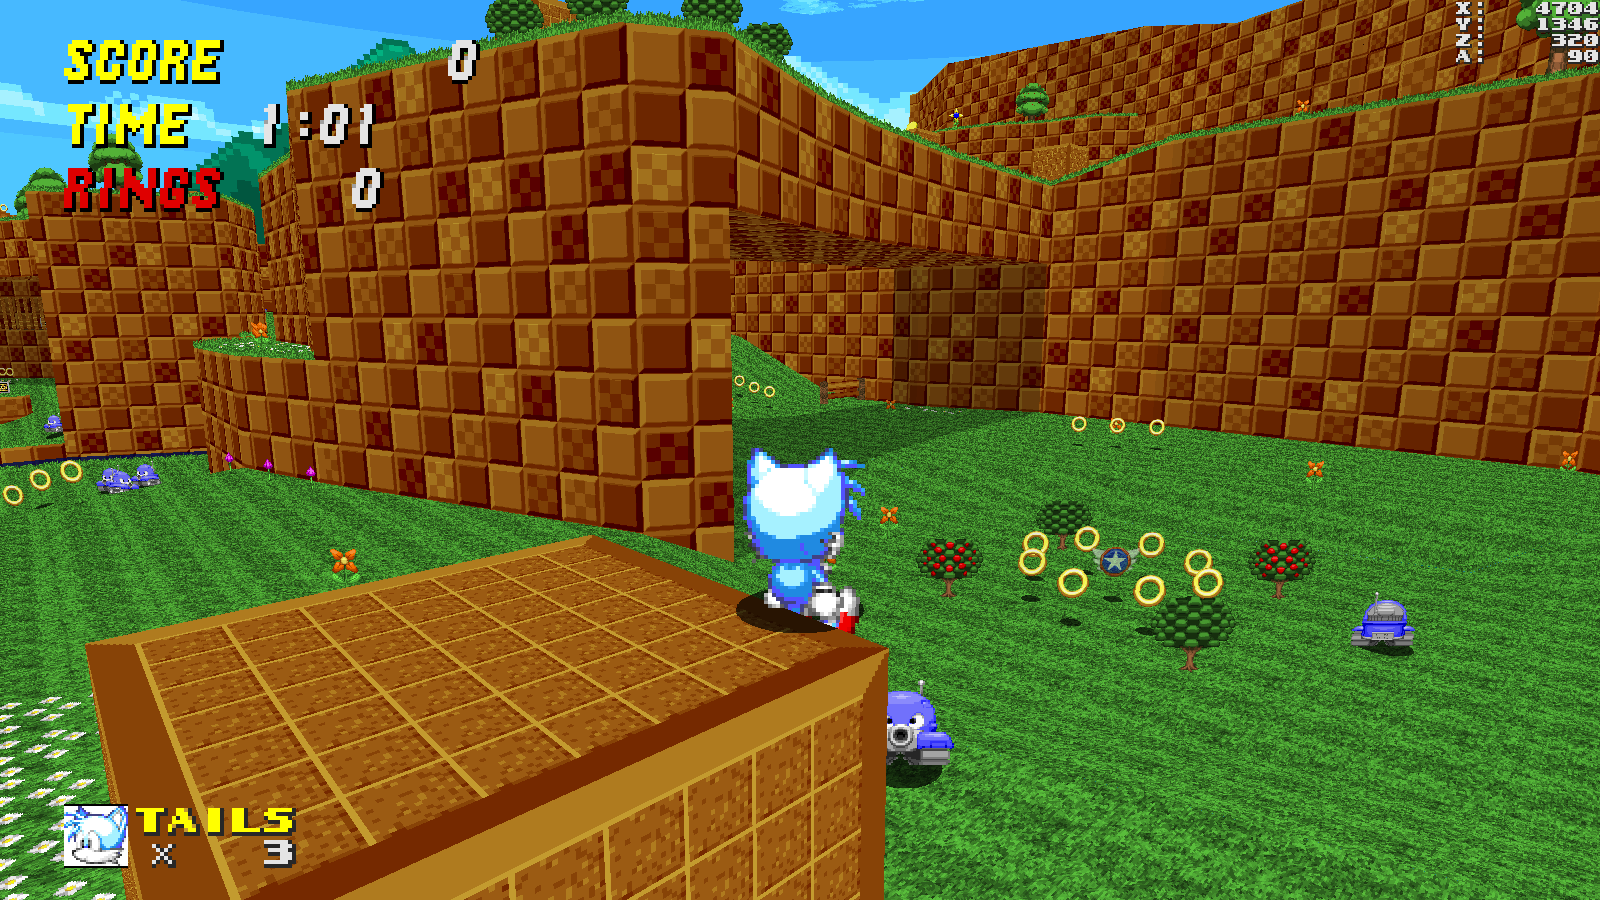 Tails sitting on a tall block in Greenflower Zone Act 1. He doesn't have his tails.